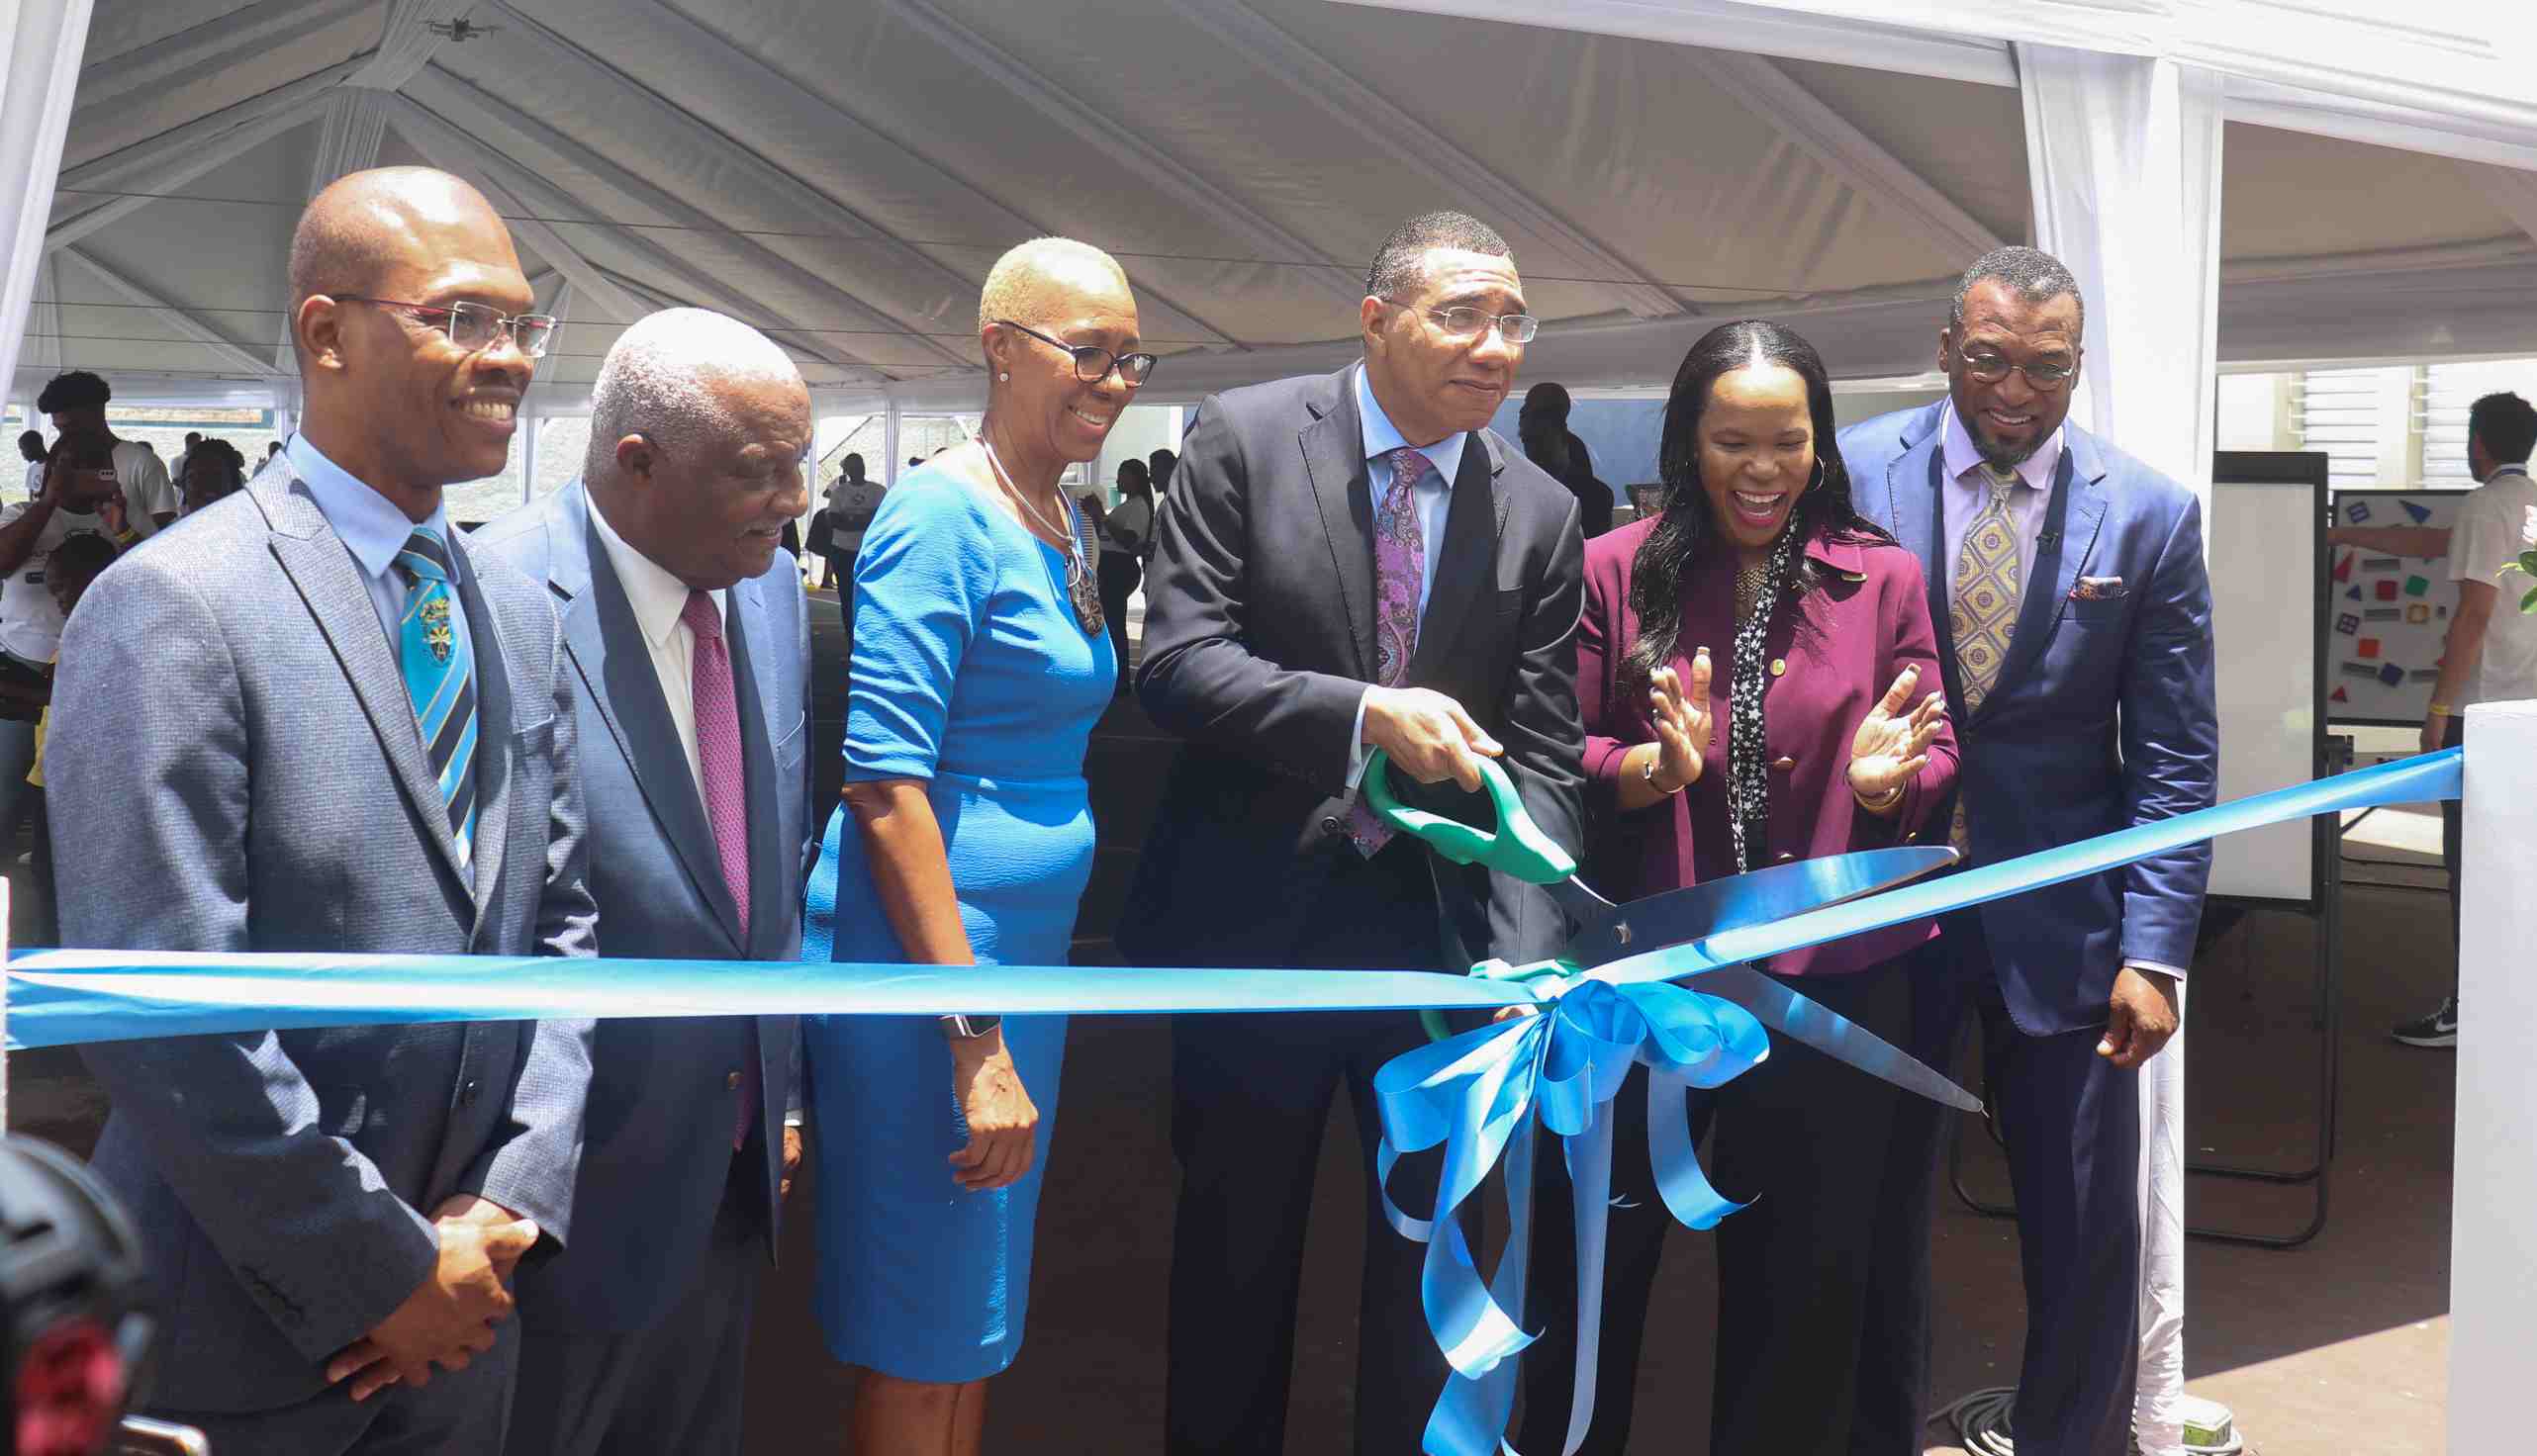 Prime Minister declares Jamaica a “STEM island” at 21stCentEd/ UTech, Ja. Future Ready International Conference